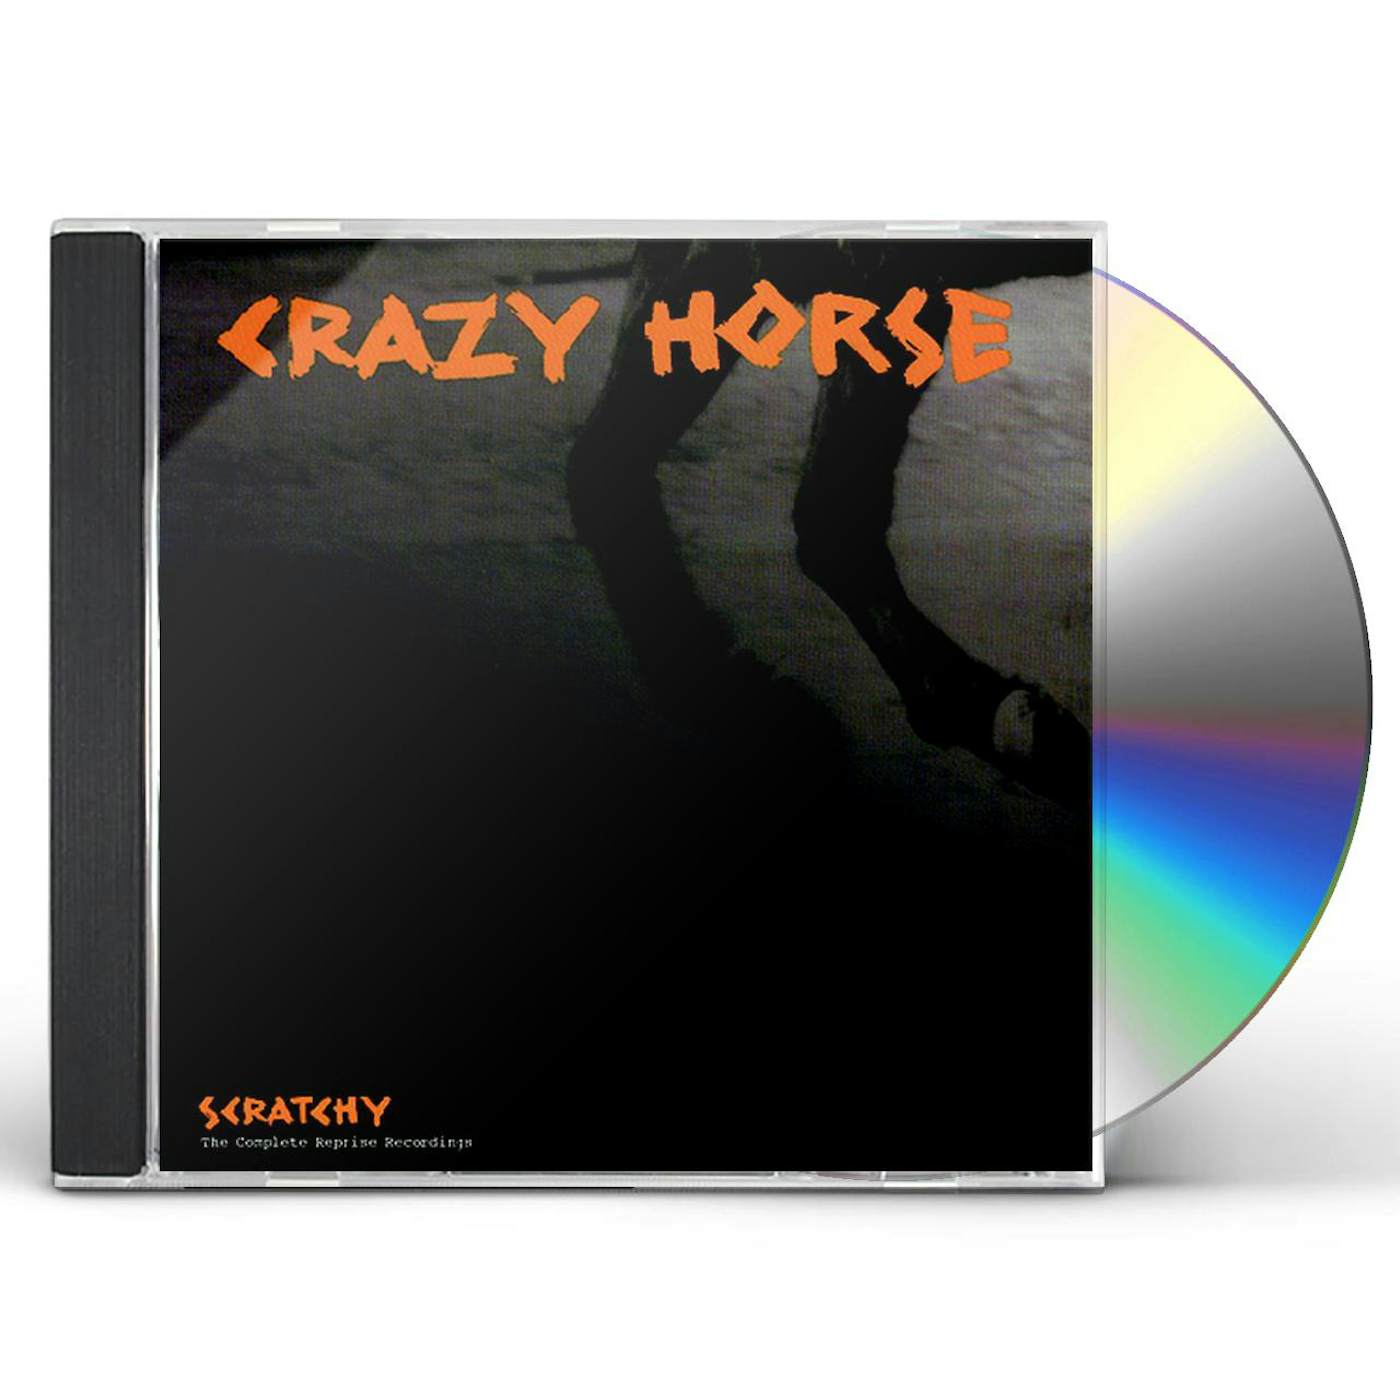 Crazy Horse SCRATCHY: THE COMPLETE REPRISE RECORDINGS (2 CD) CD